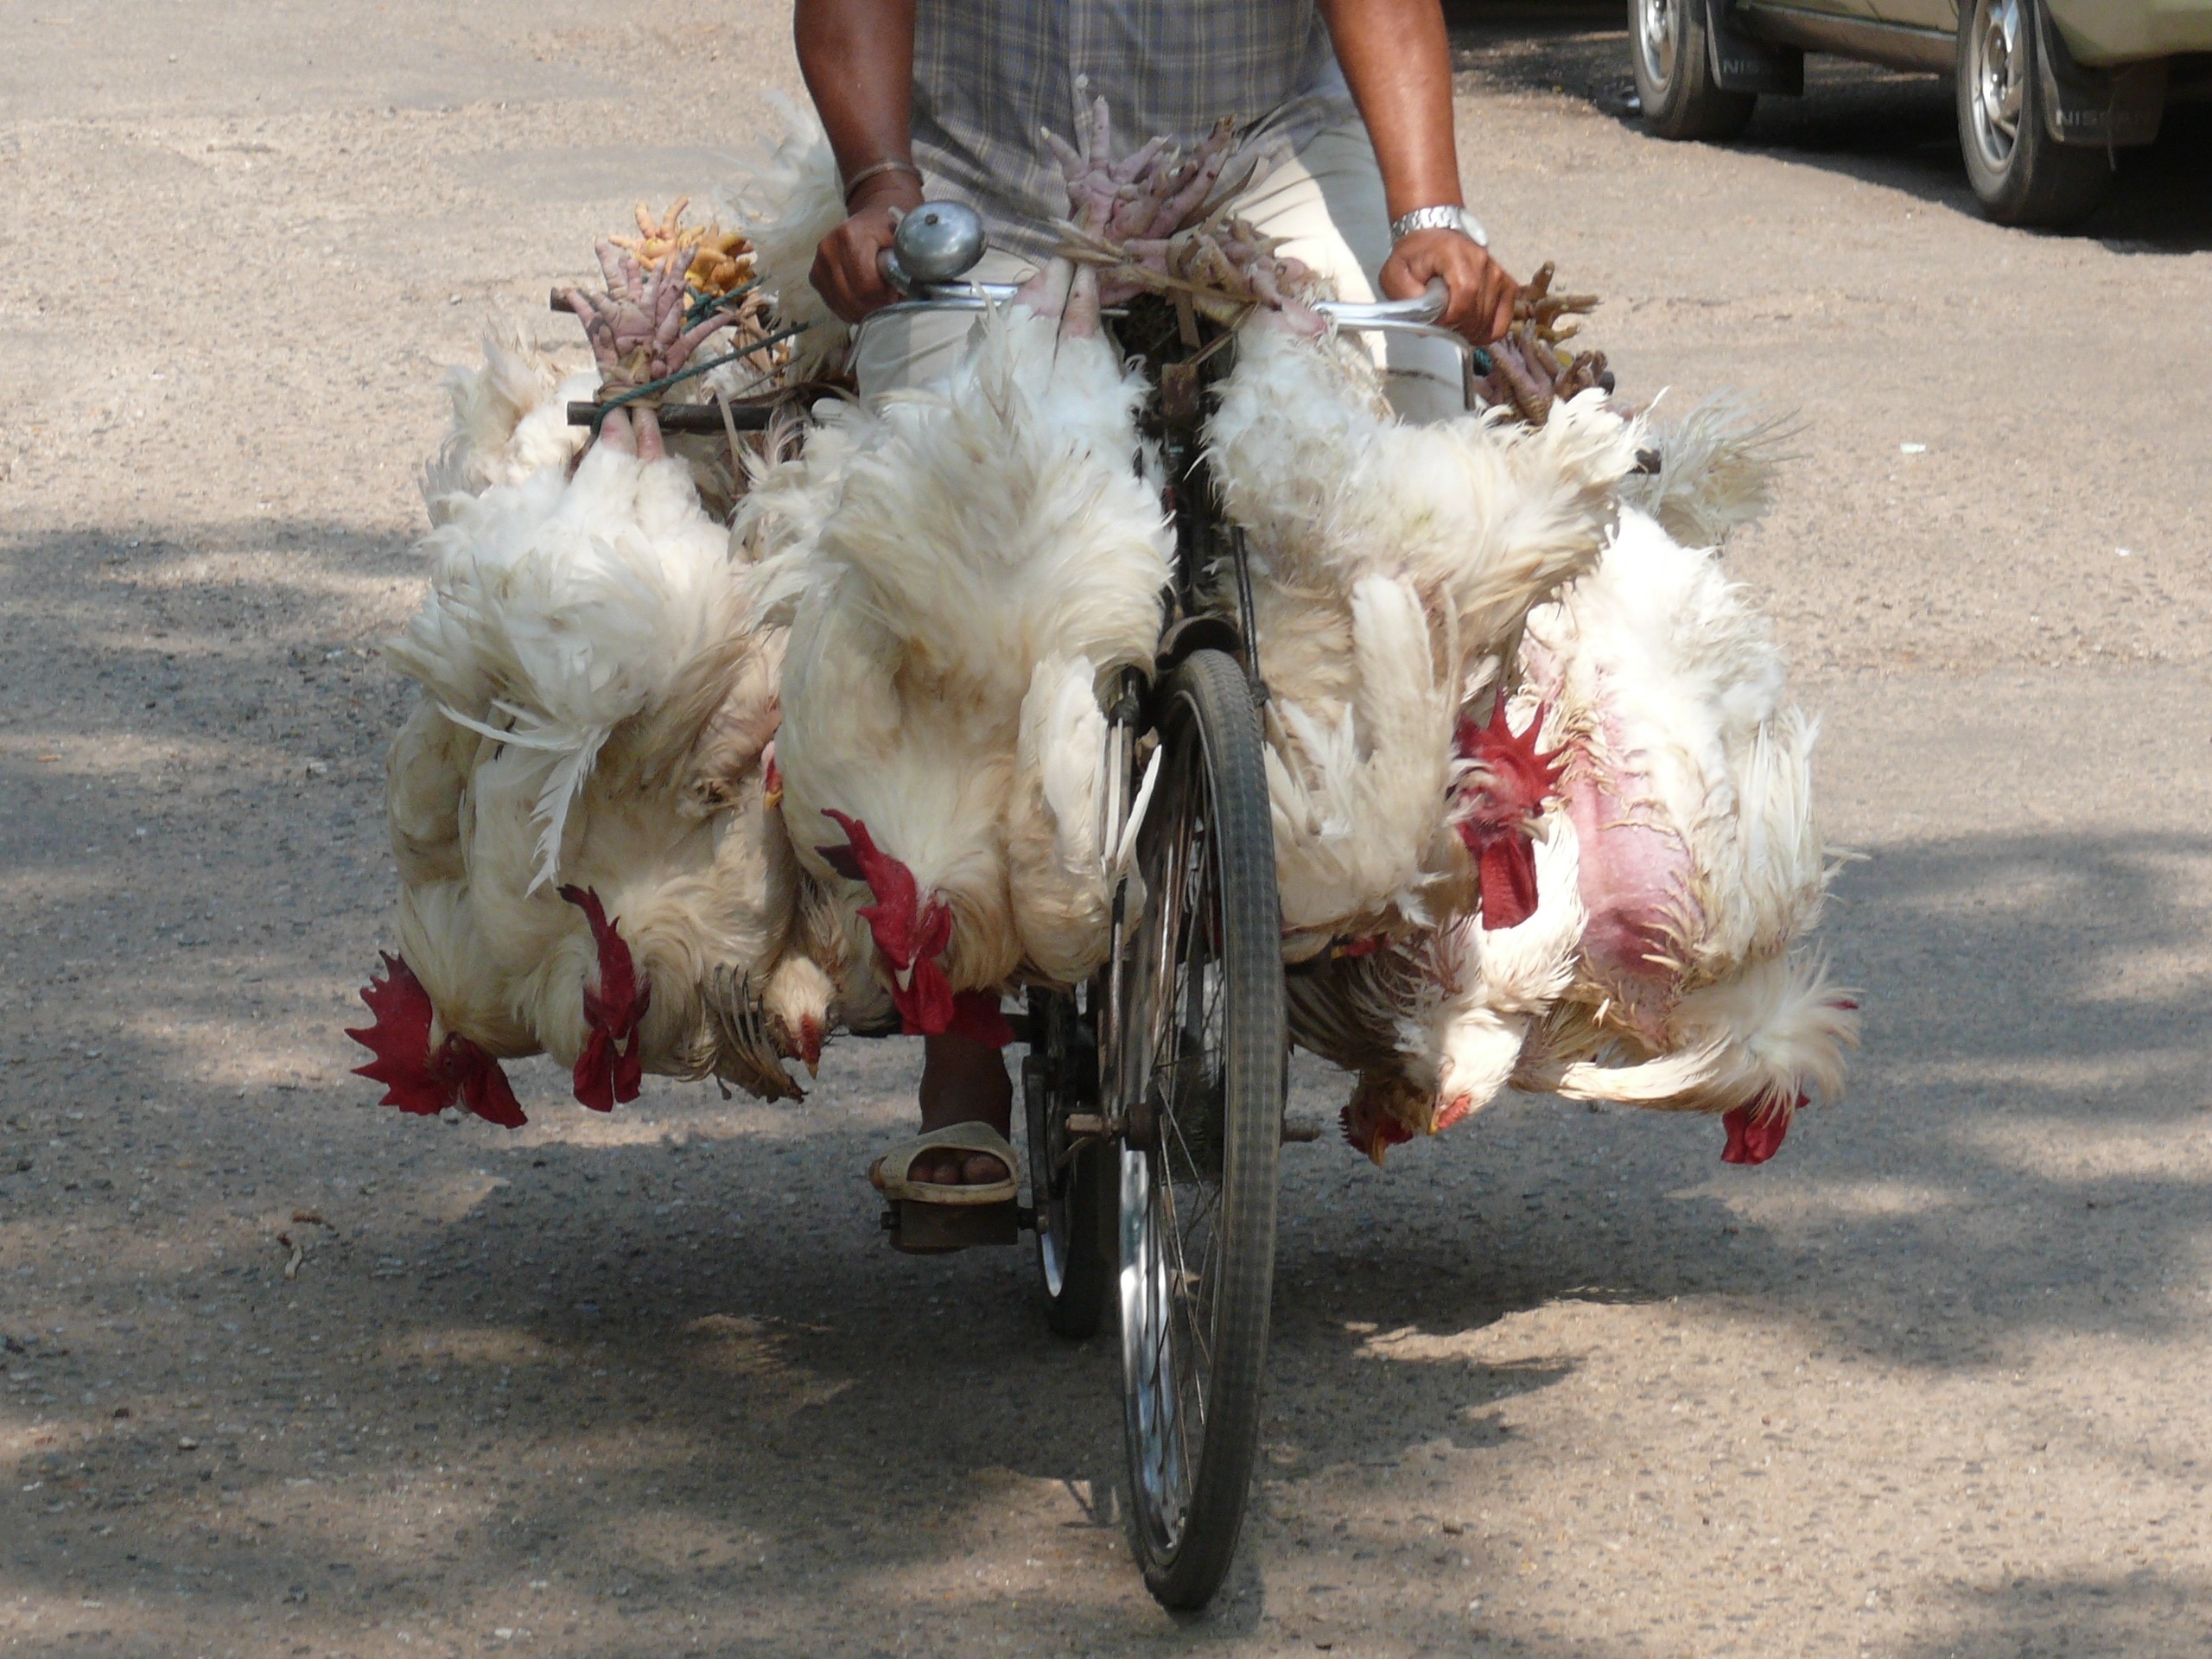 capture image of white hen tied in a bike